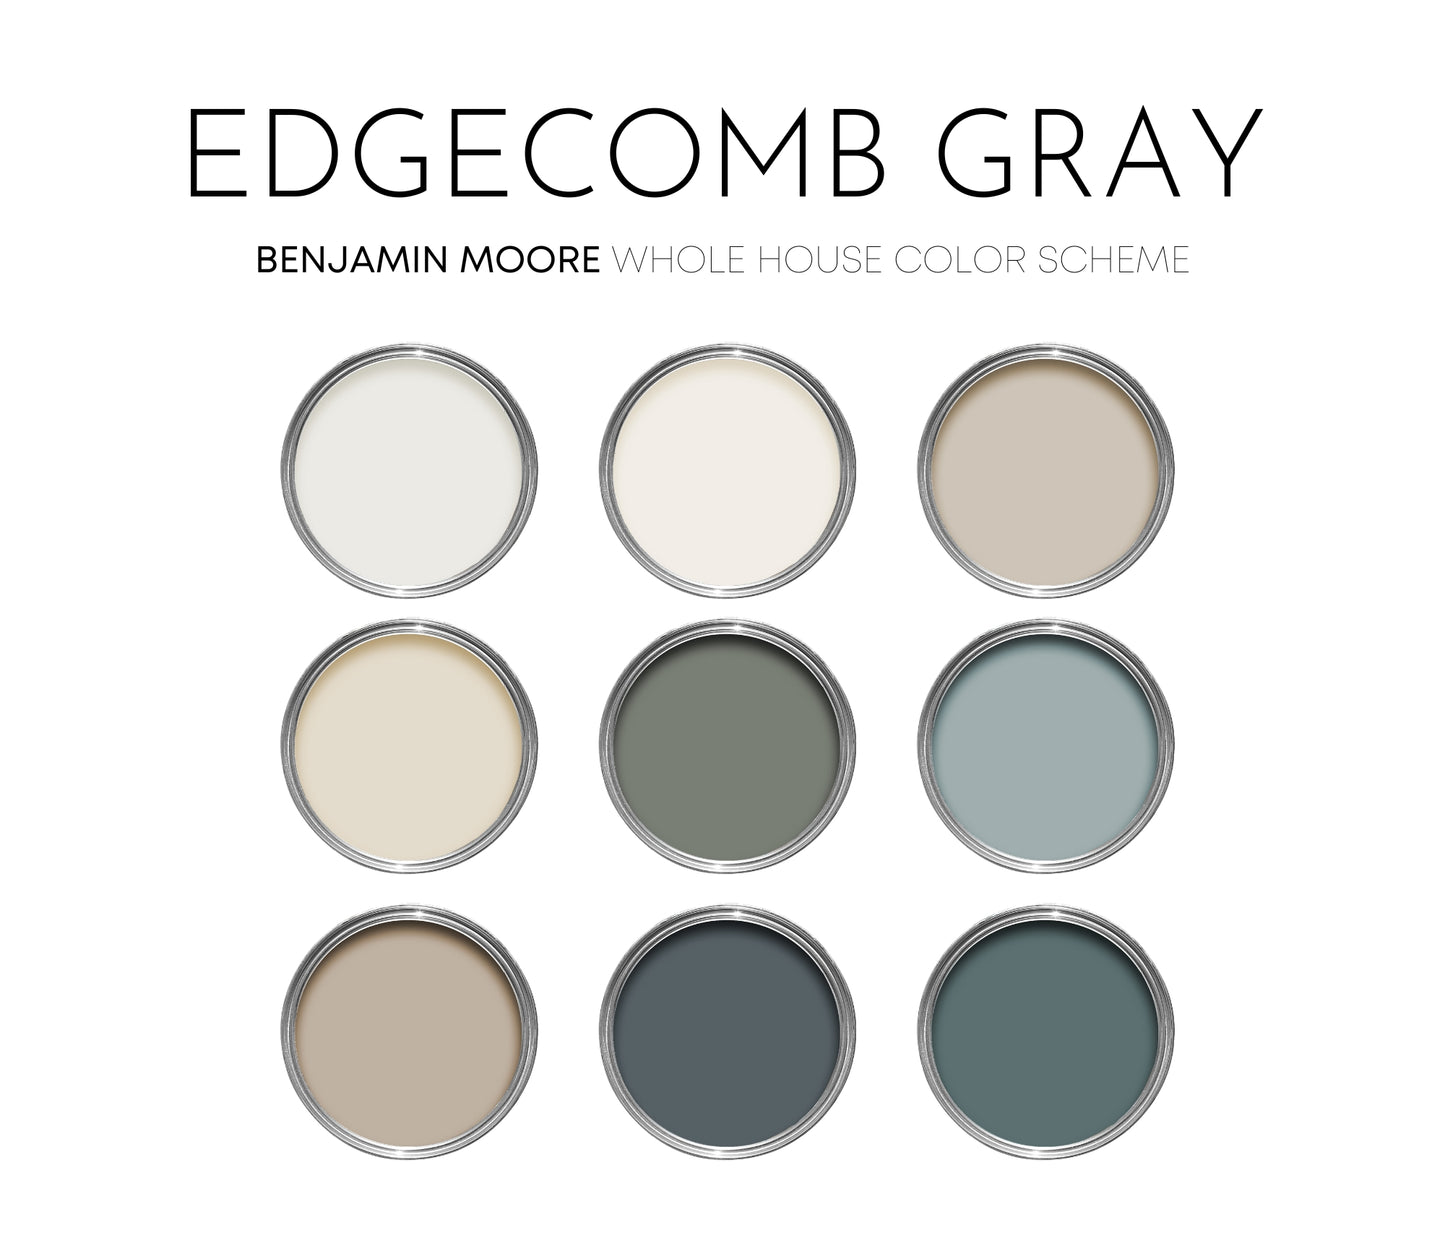 Edgecomb Gray Benjamin Moore Paint Palette, Modern Neutral Interior Paint Colors for Home, Edgecomb Gray Compliments, Warm Whites, Mount Saint Anne